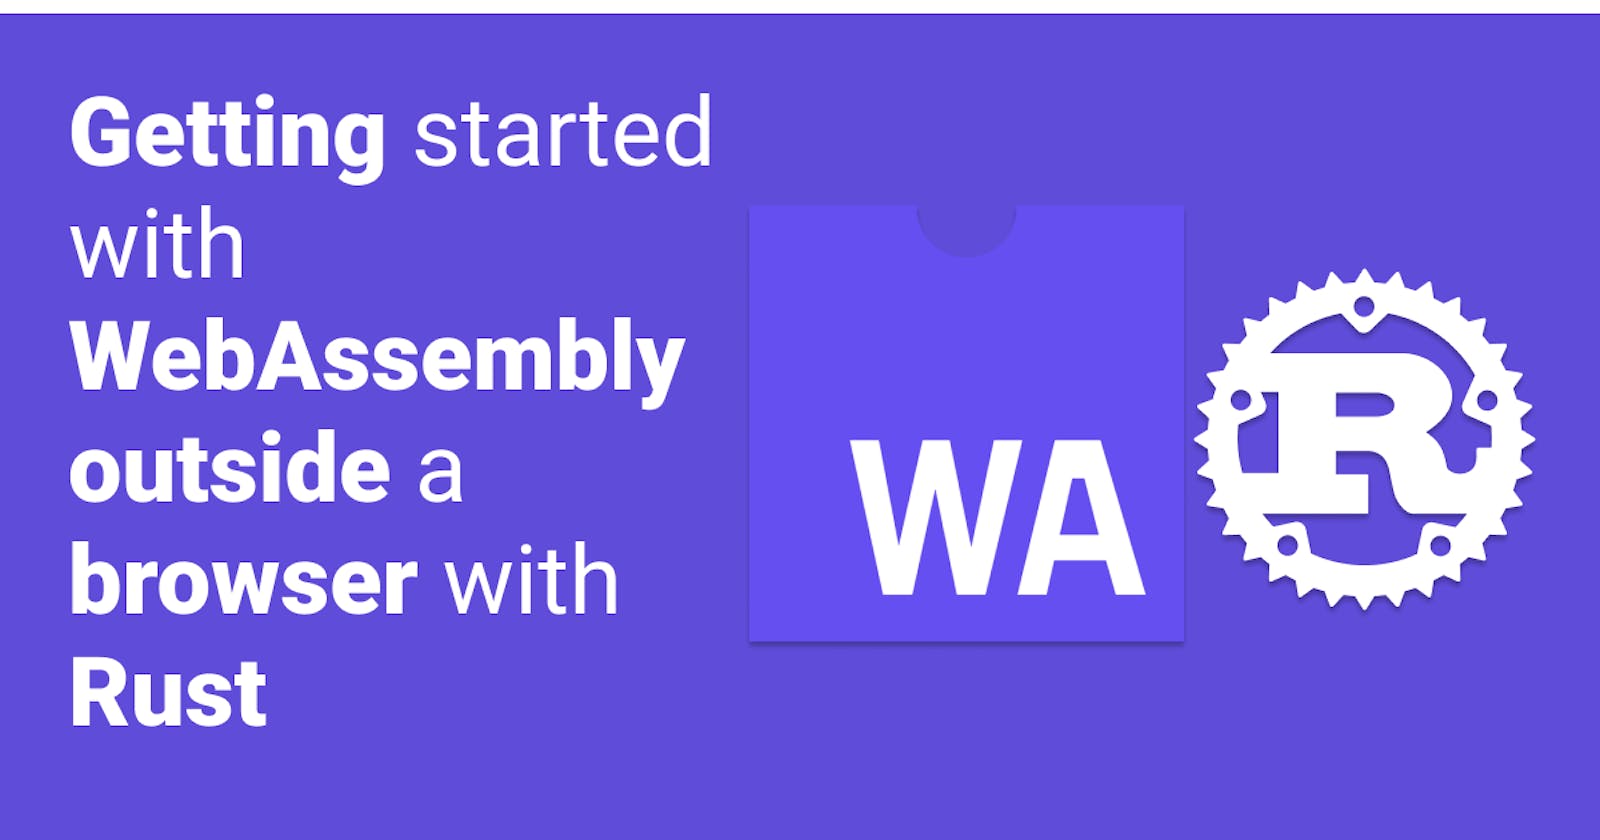 Getting started with WebAssembly outside a browser with Rust